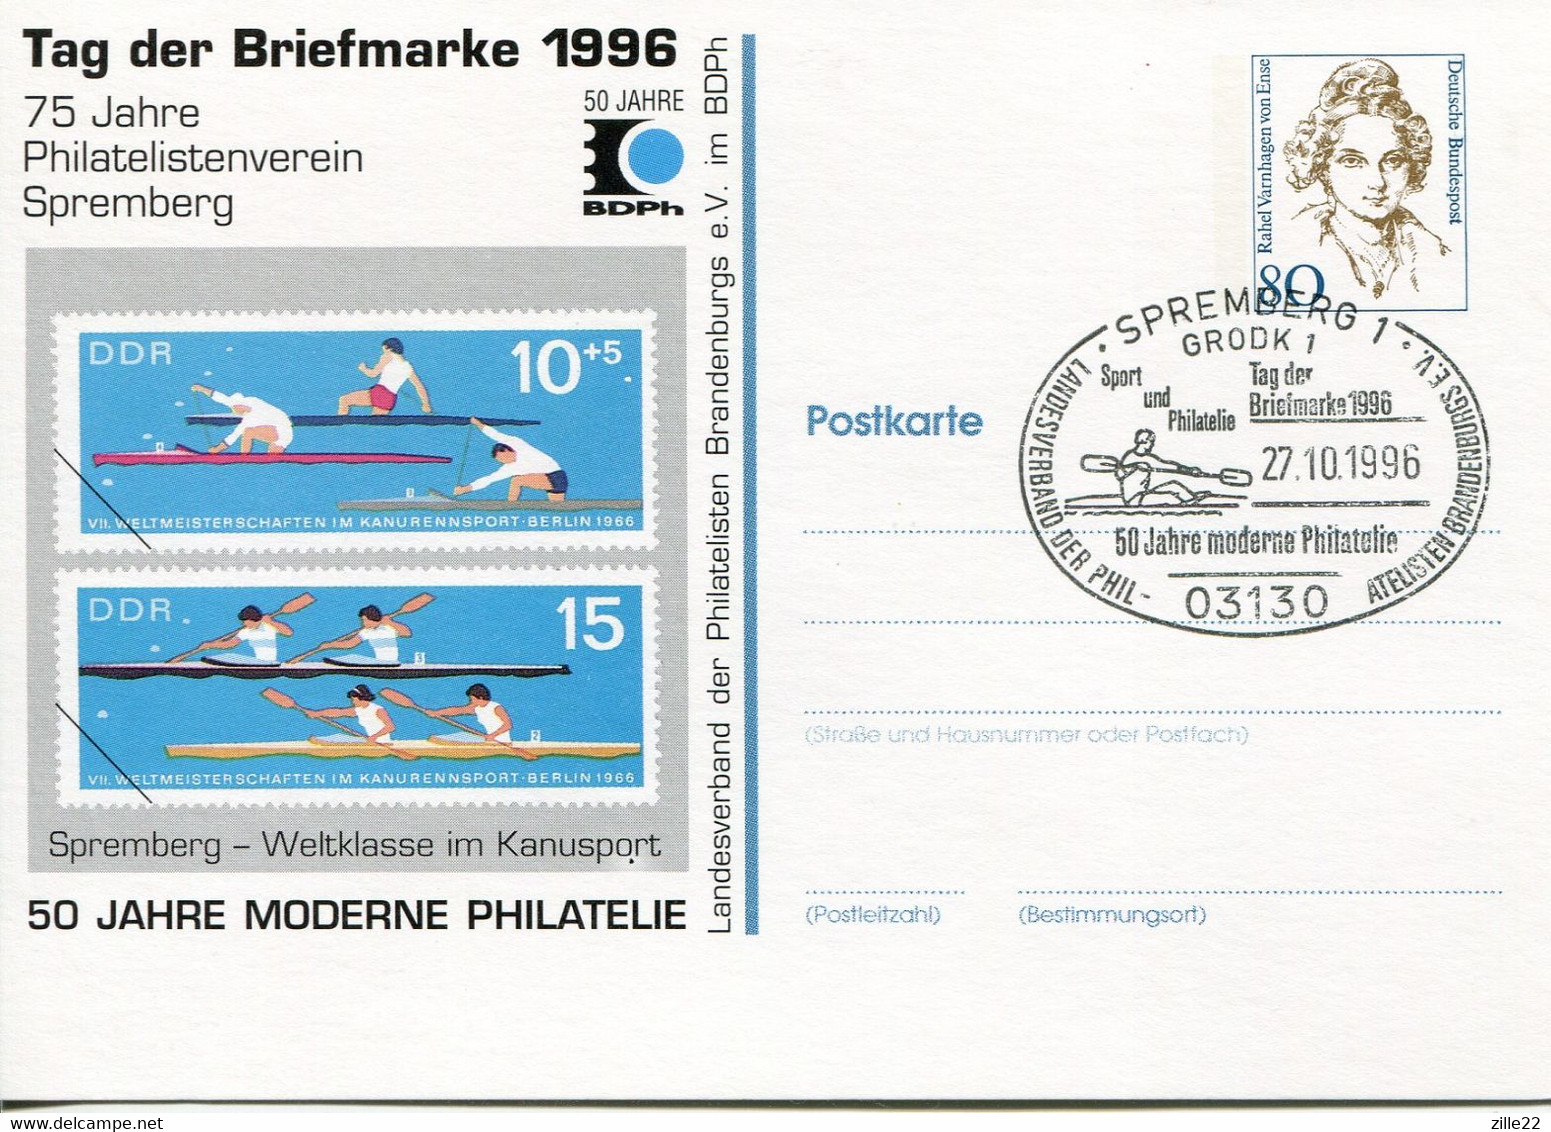 Germany Deutschland postal stationery - private card - CTO - von Ense design - stamp day, 50th collectors union jubilee